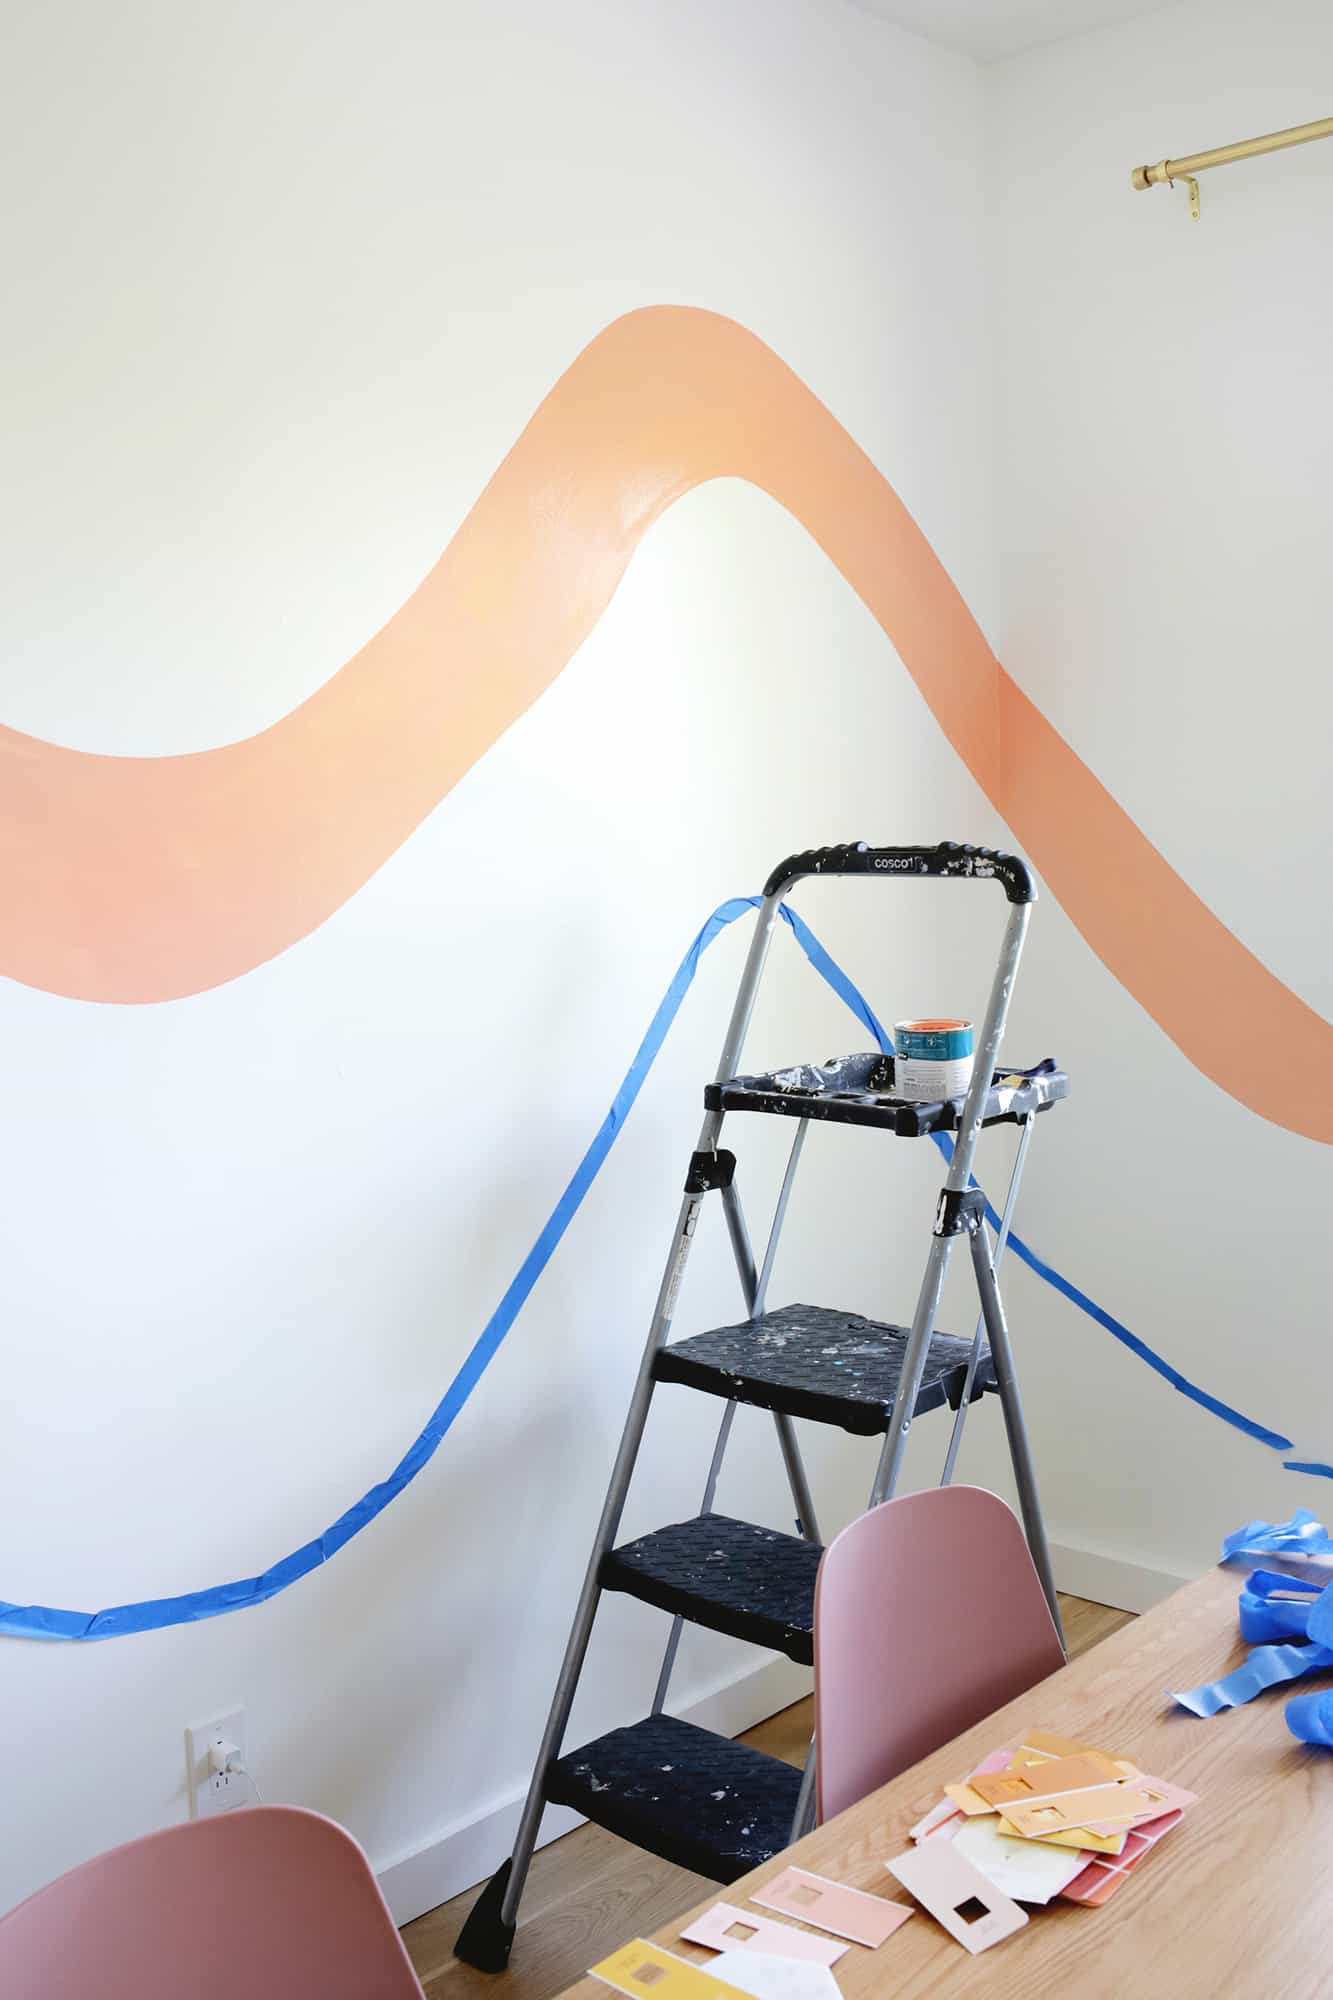 How to Paint a Wave on a Wall 